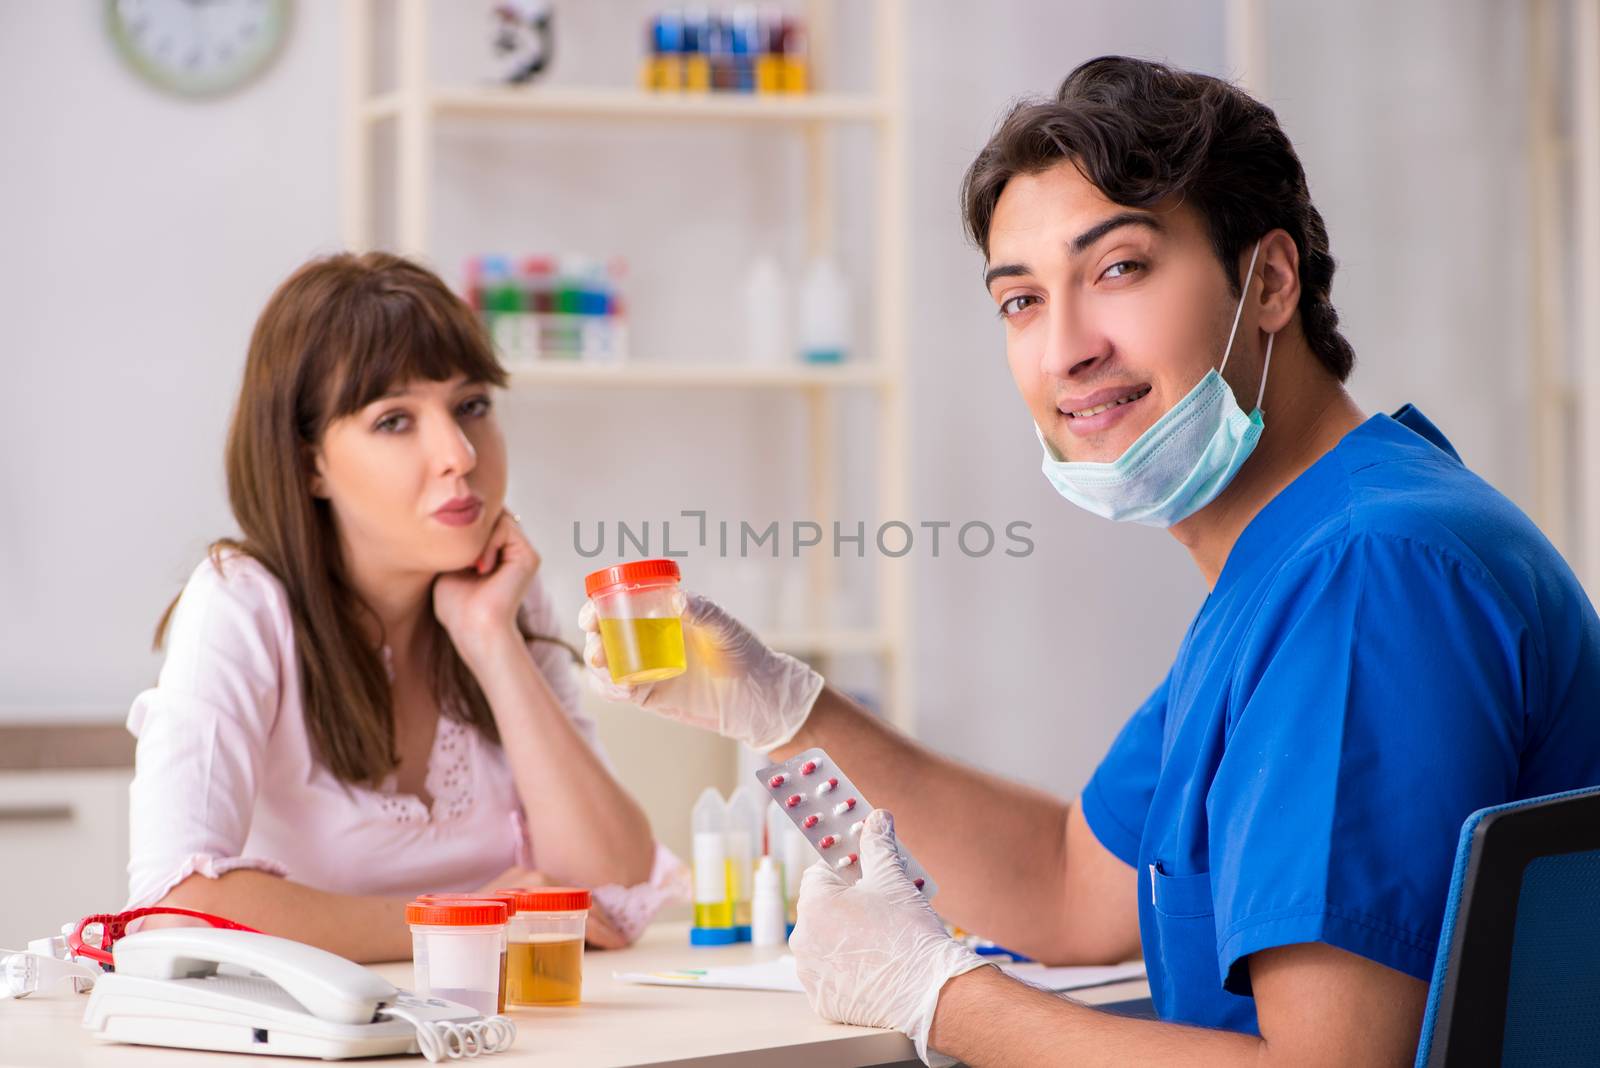 Patient visiting doctor for urine test by Elnur